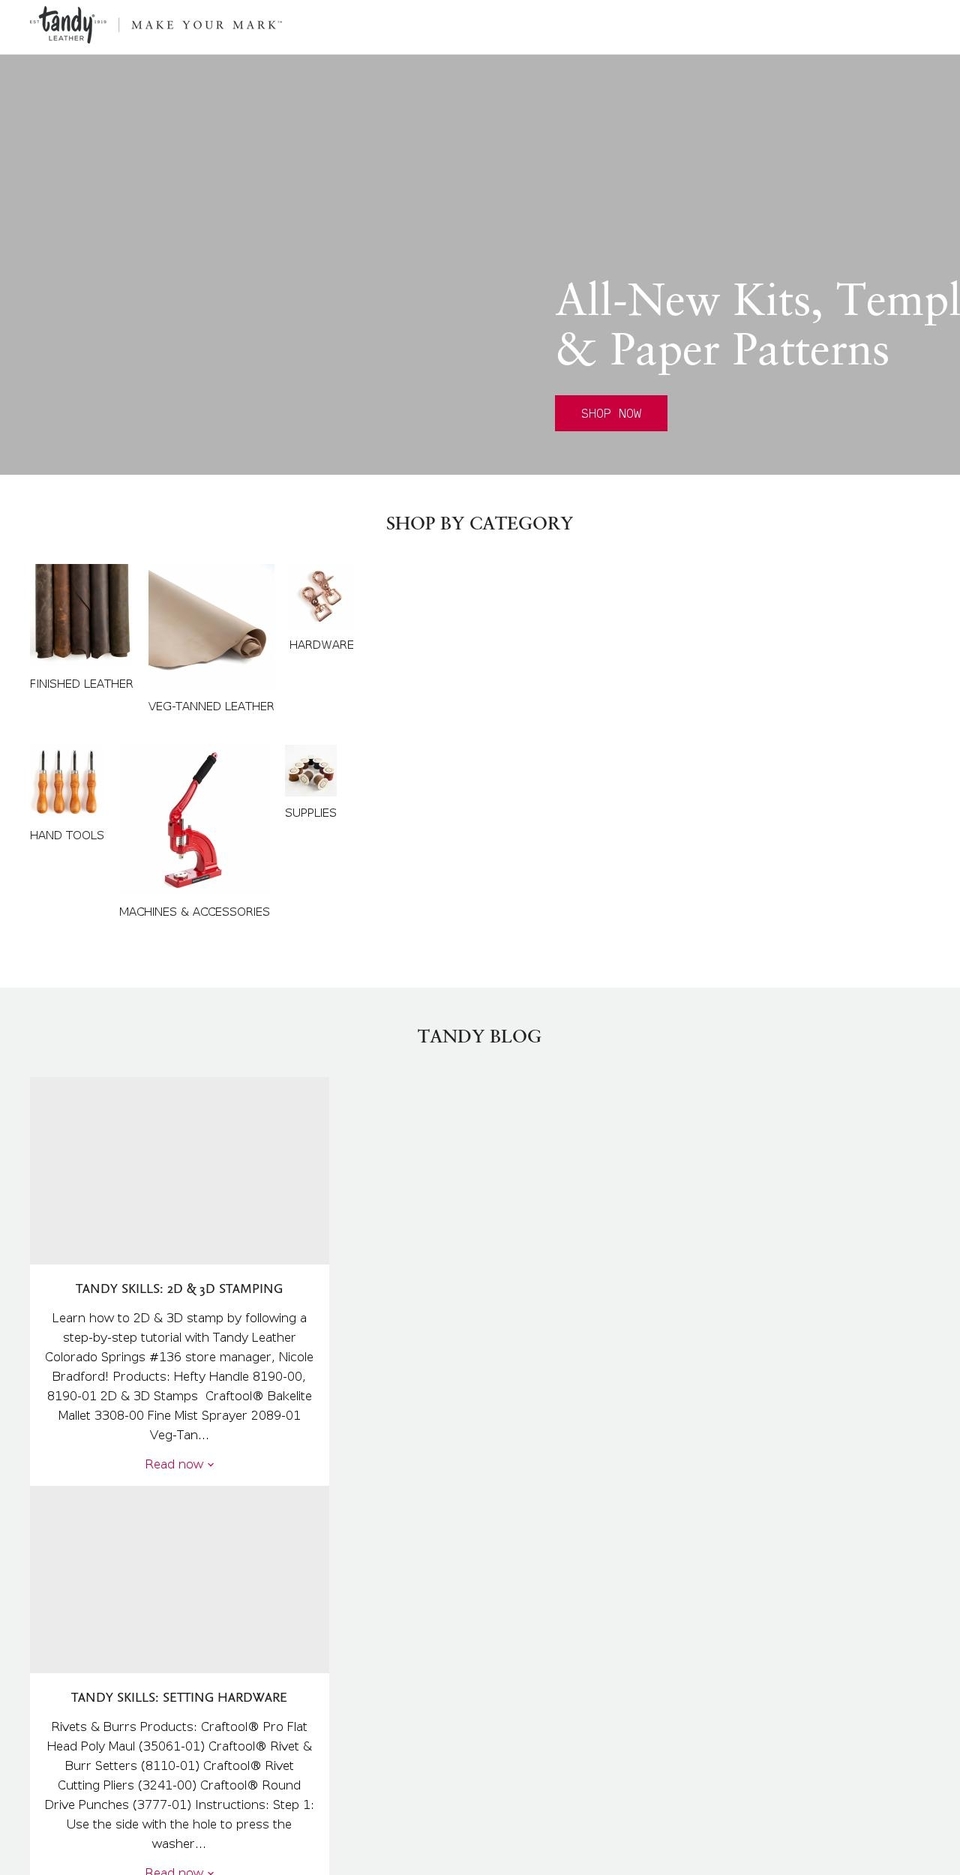 Leather Shopify theme site example tandyleatherfactory.uk